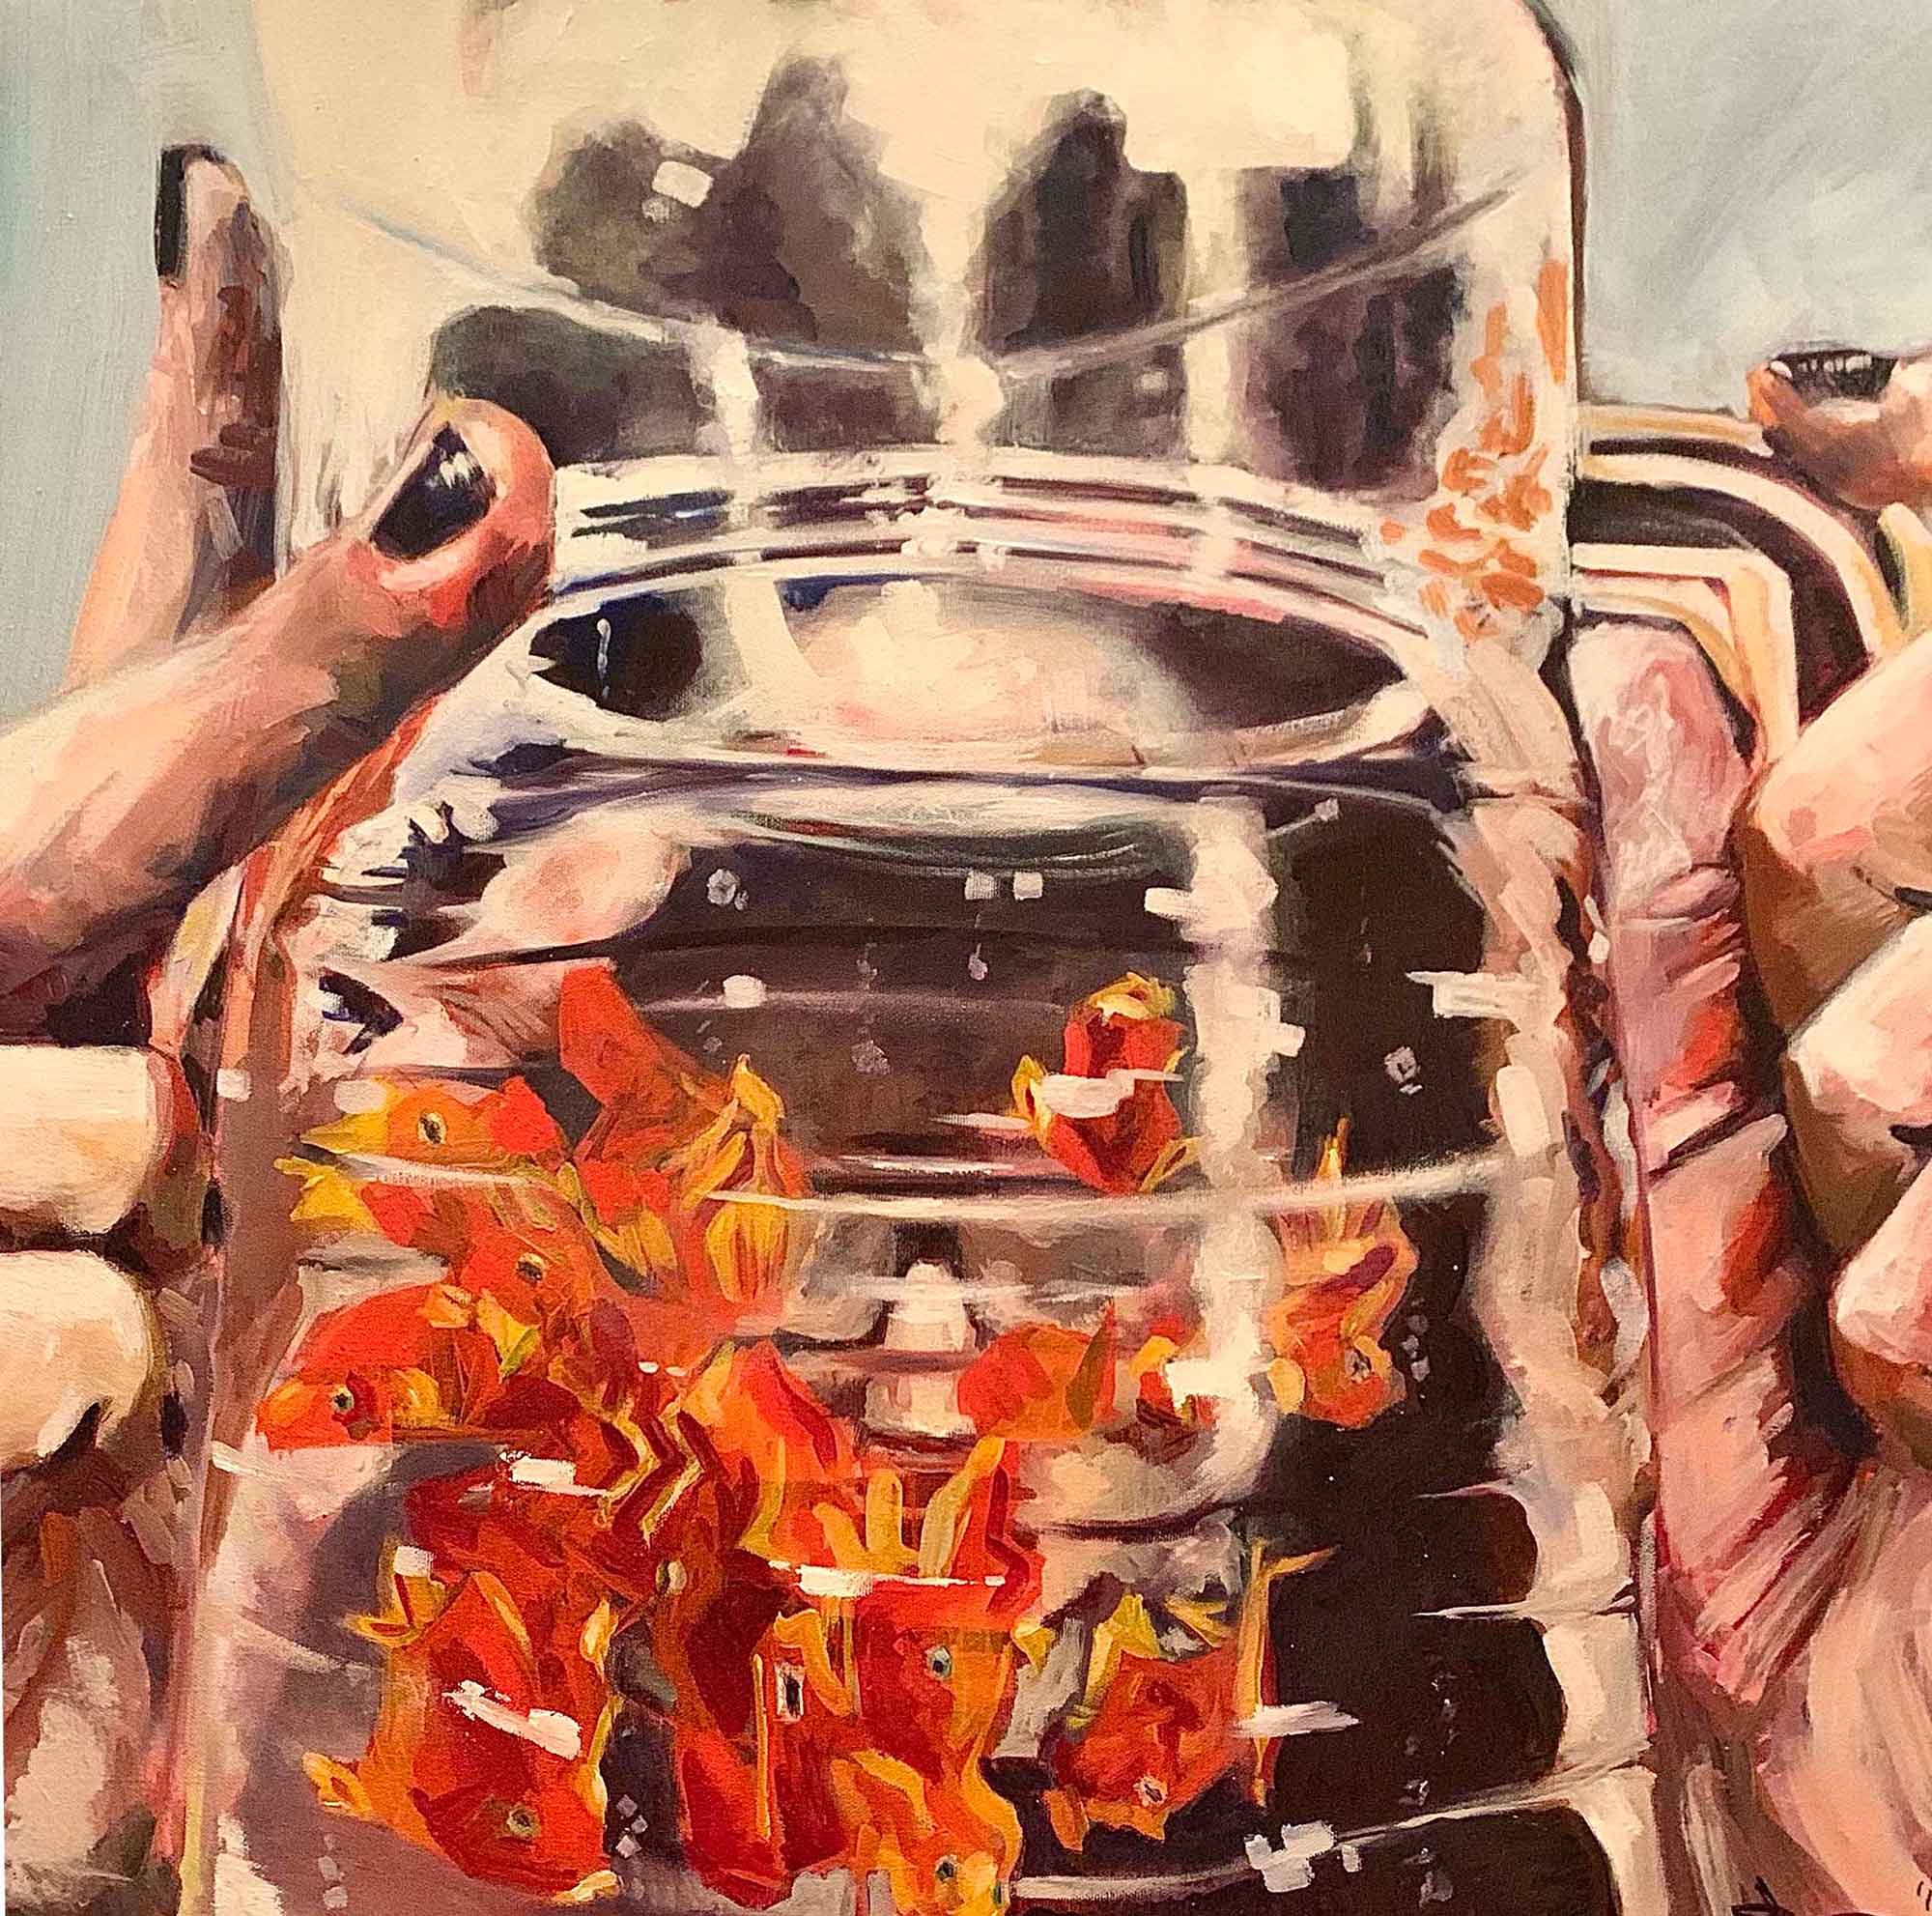 A painting of a jar of fish